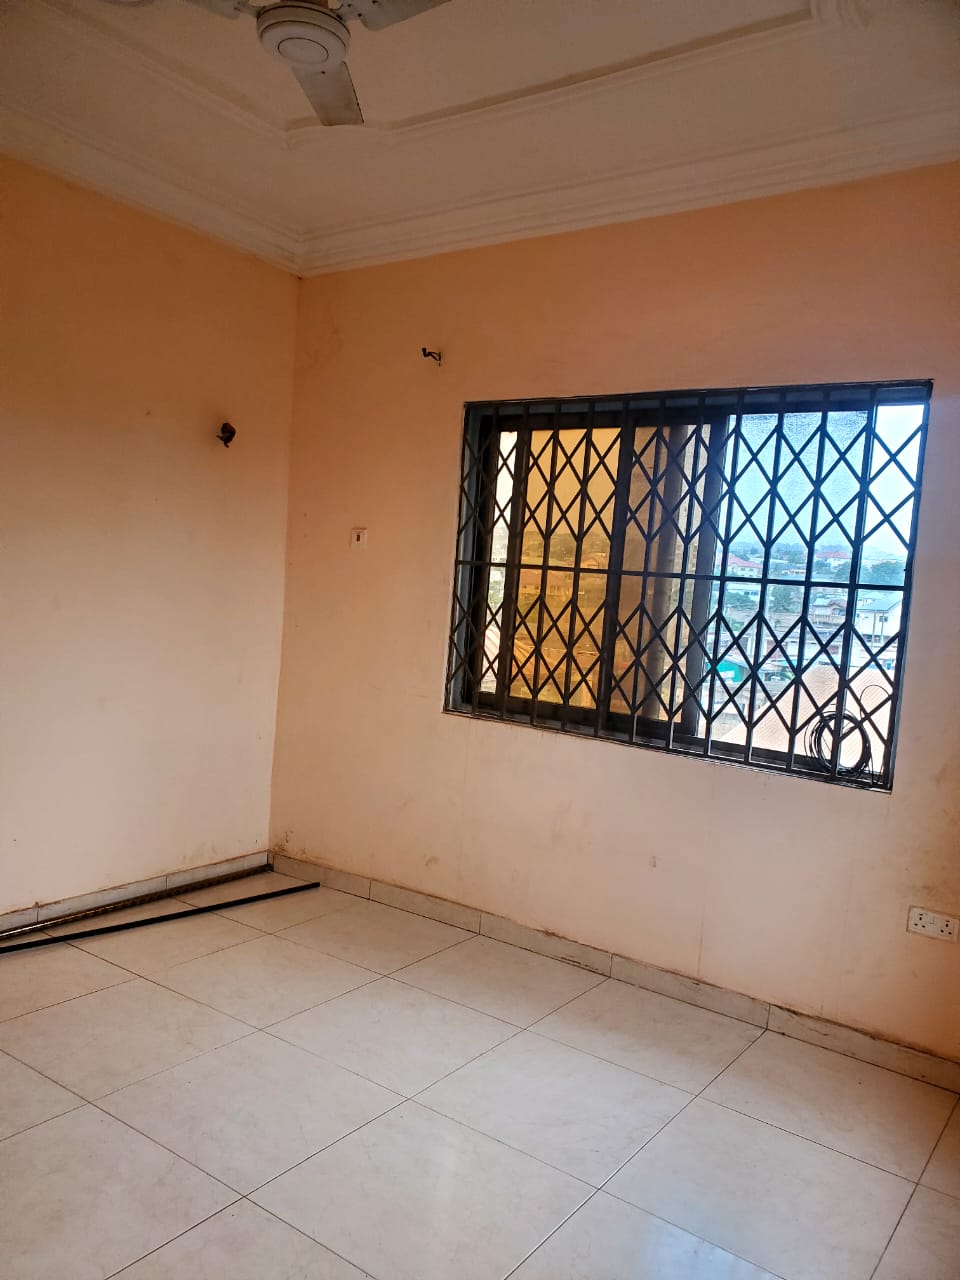 Two (2) Bedroom Unfurnished Apartment for Rent in Antie Aku